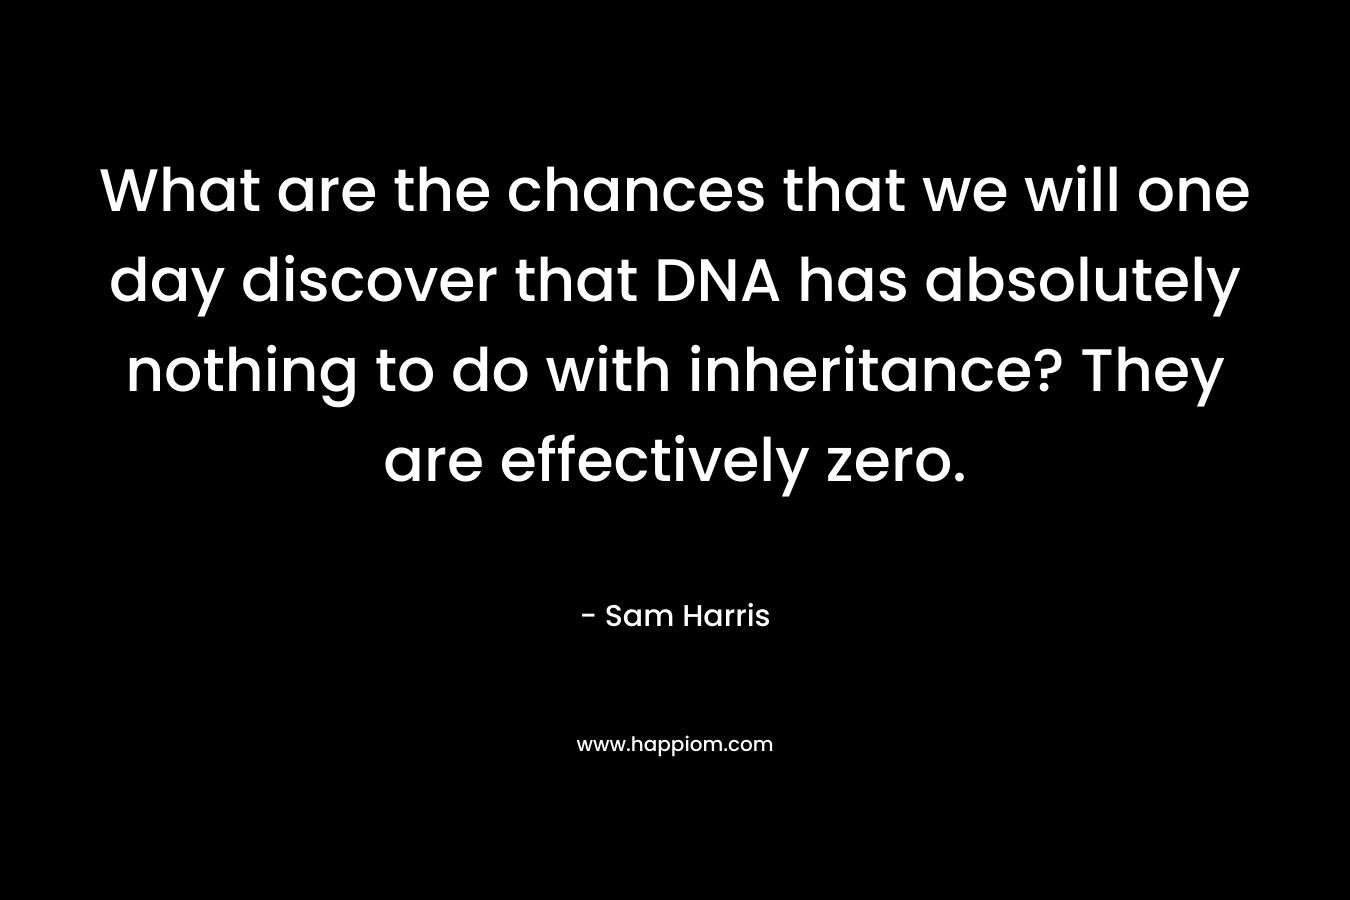 What are the chances that we will one day discover that DNA has absolutely nothing to do with inheritance? They are effectively zero. – Sam Harris